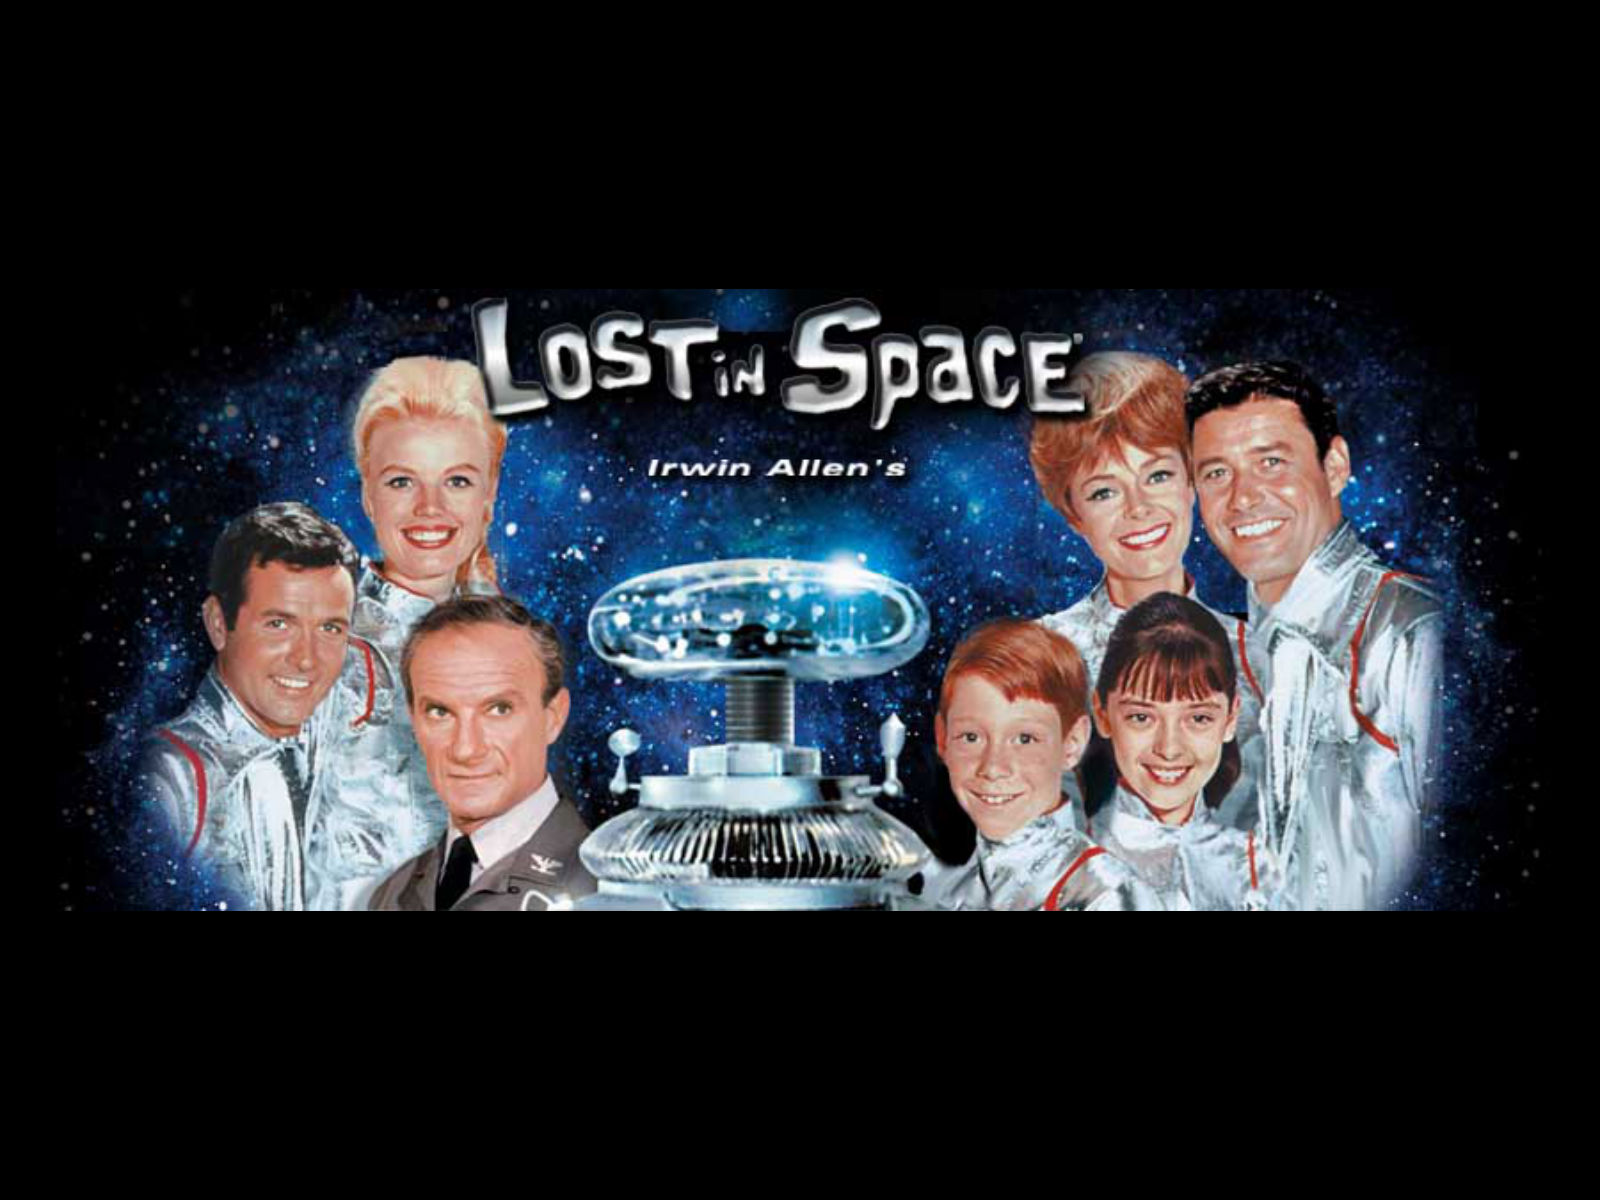 Lost in Space Merchandise Brought to You by Amazoncom and Meredycom